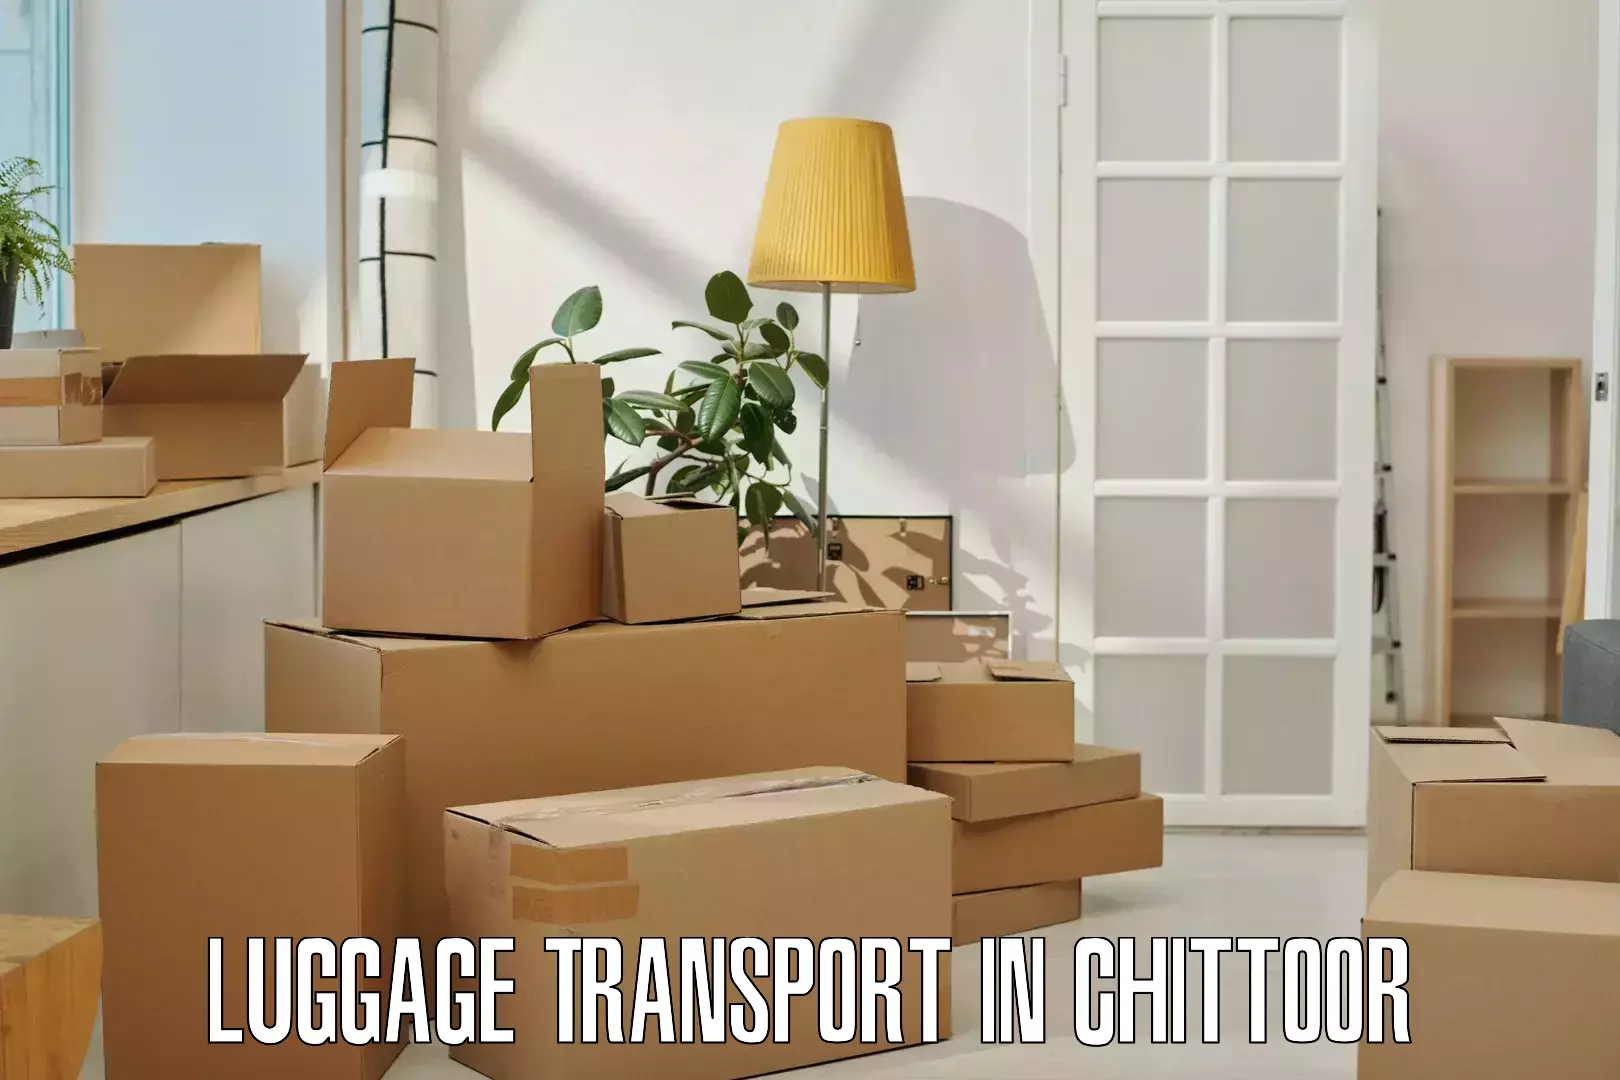 Luggage shipment processing in Chittoor